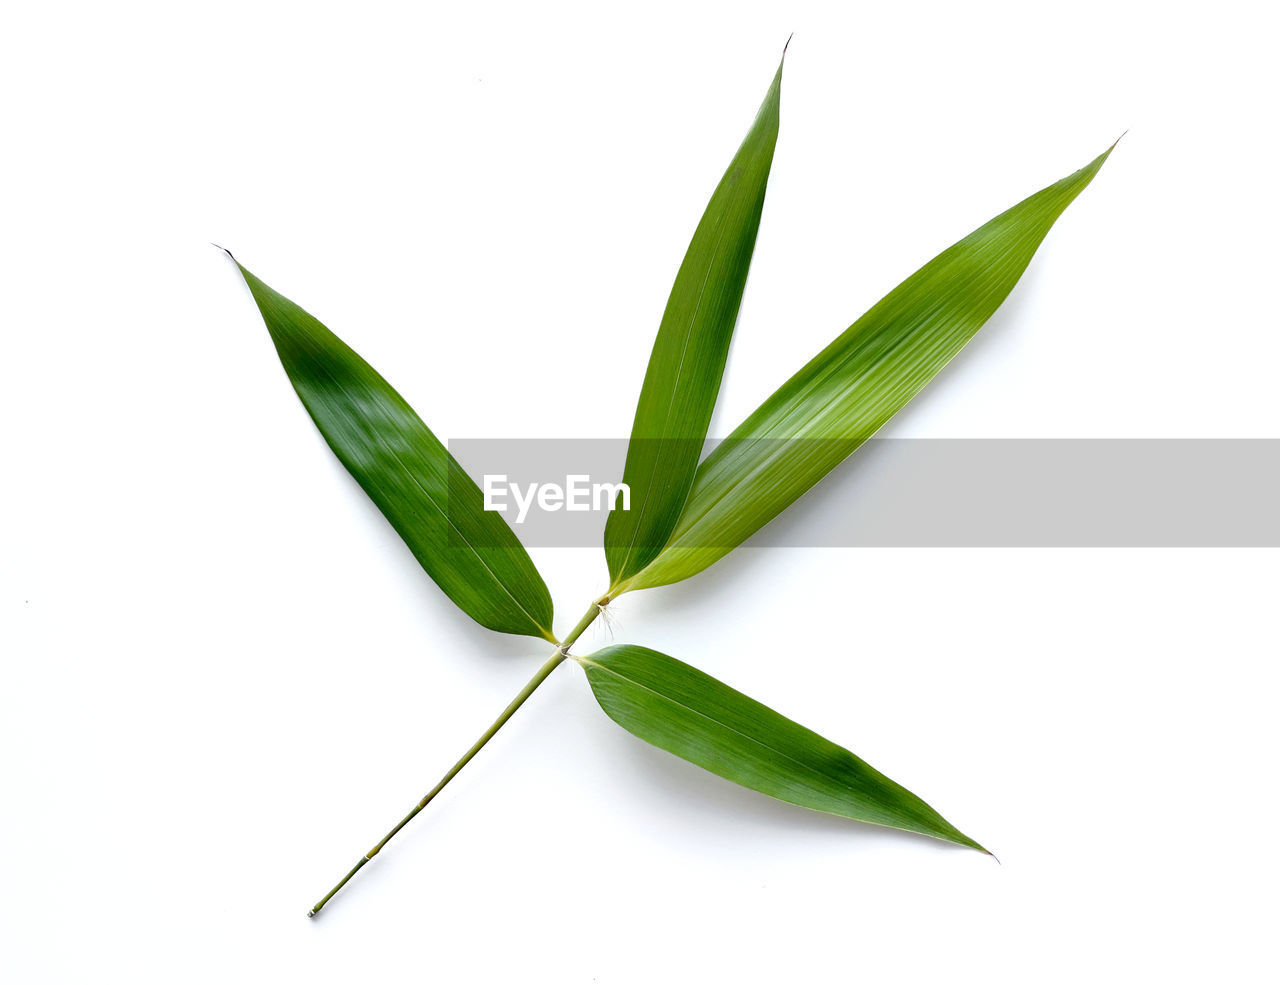 leaf, plant part, green, plant, cut out, food and drink, nature, food, flower, freshness, white background, herb, medicine, herbal medicine, grass, no people, studio shot, healthcare and medicine, close-up, branch, wellbeing, indoors, ingredient, beauty in nature, plant stem